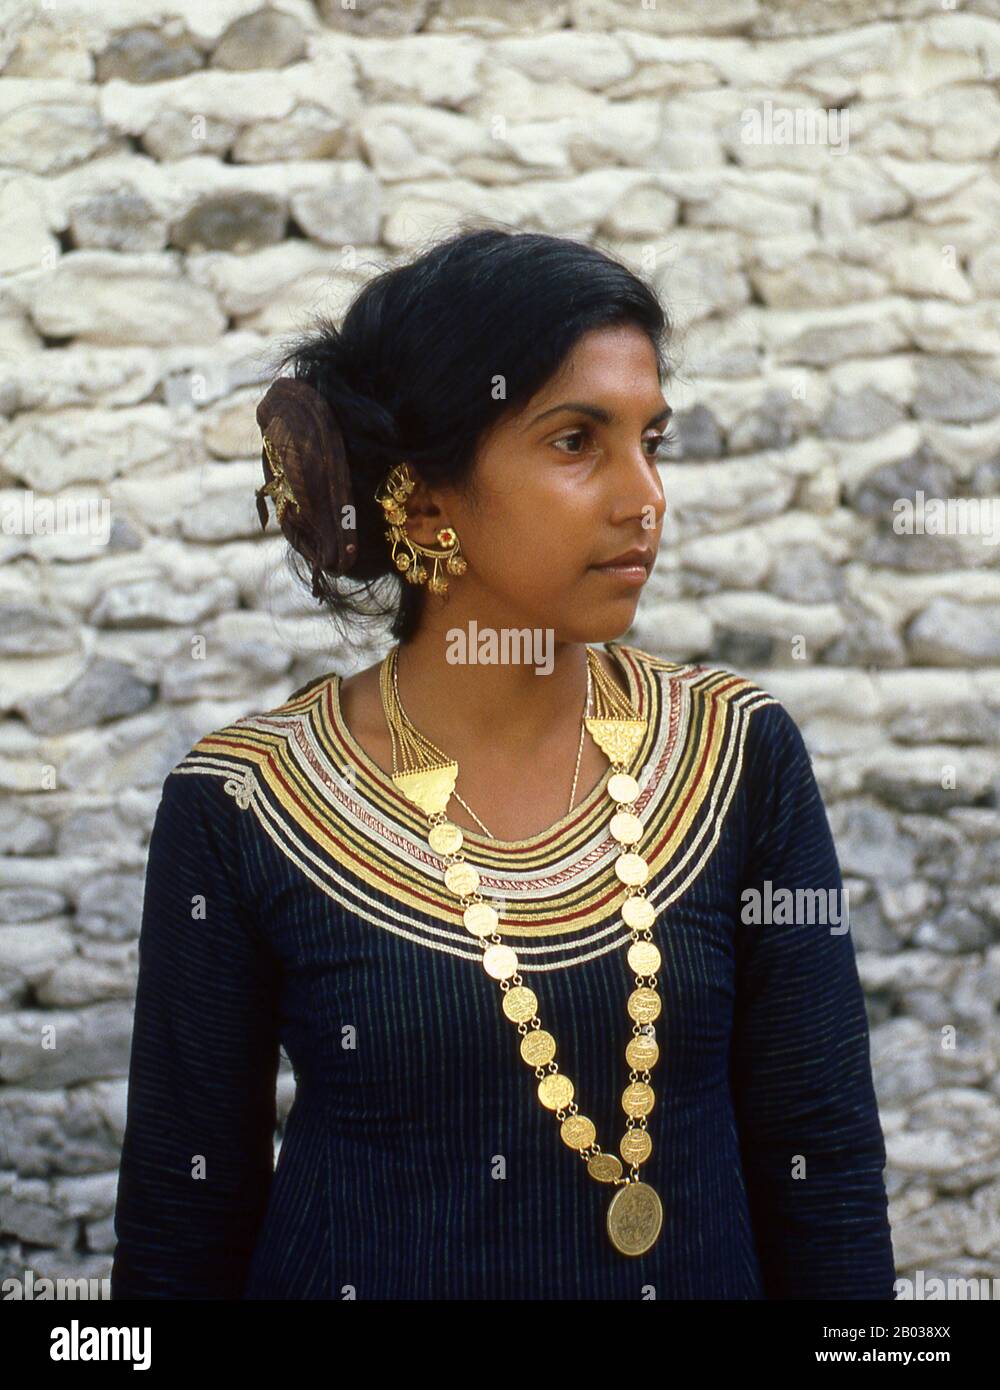 The dhivehi libaas is a traditional Maldivian dress for women. The neckline is adorned with what is called Kasabu viyun, a collar hand stitched with silver and gold laces.  On the eastern rim of the South Nilandhoo Atoll lies the tiny island of Rinbudhoo. Here, in one of the quietest and cleanest villages in the Maldives, lives the country's only group of hereditary goldsmiths. Melting down Victorian gold sovereigns and Marie-Therèse thalers as casually as recently-imported mini-ingots from Dubai, they manufacture an exquisite range of chains, necklaces, ear-rings, finger-rings and amulets.  A Stock Photo